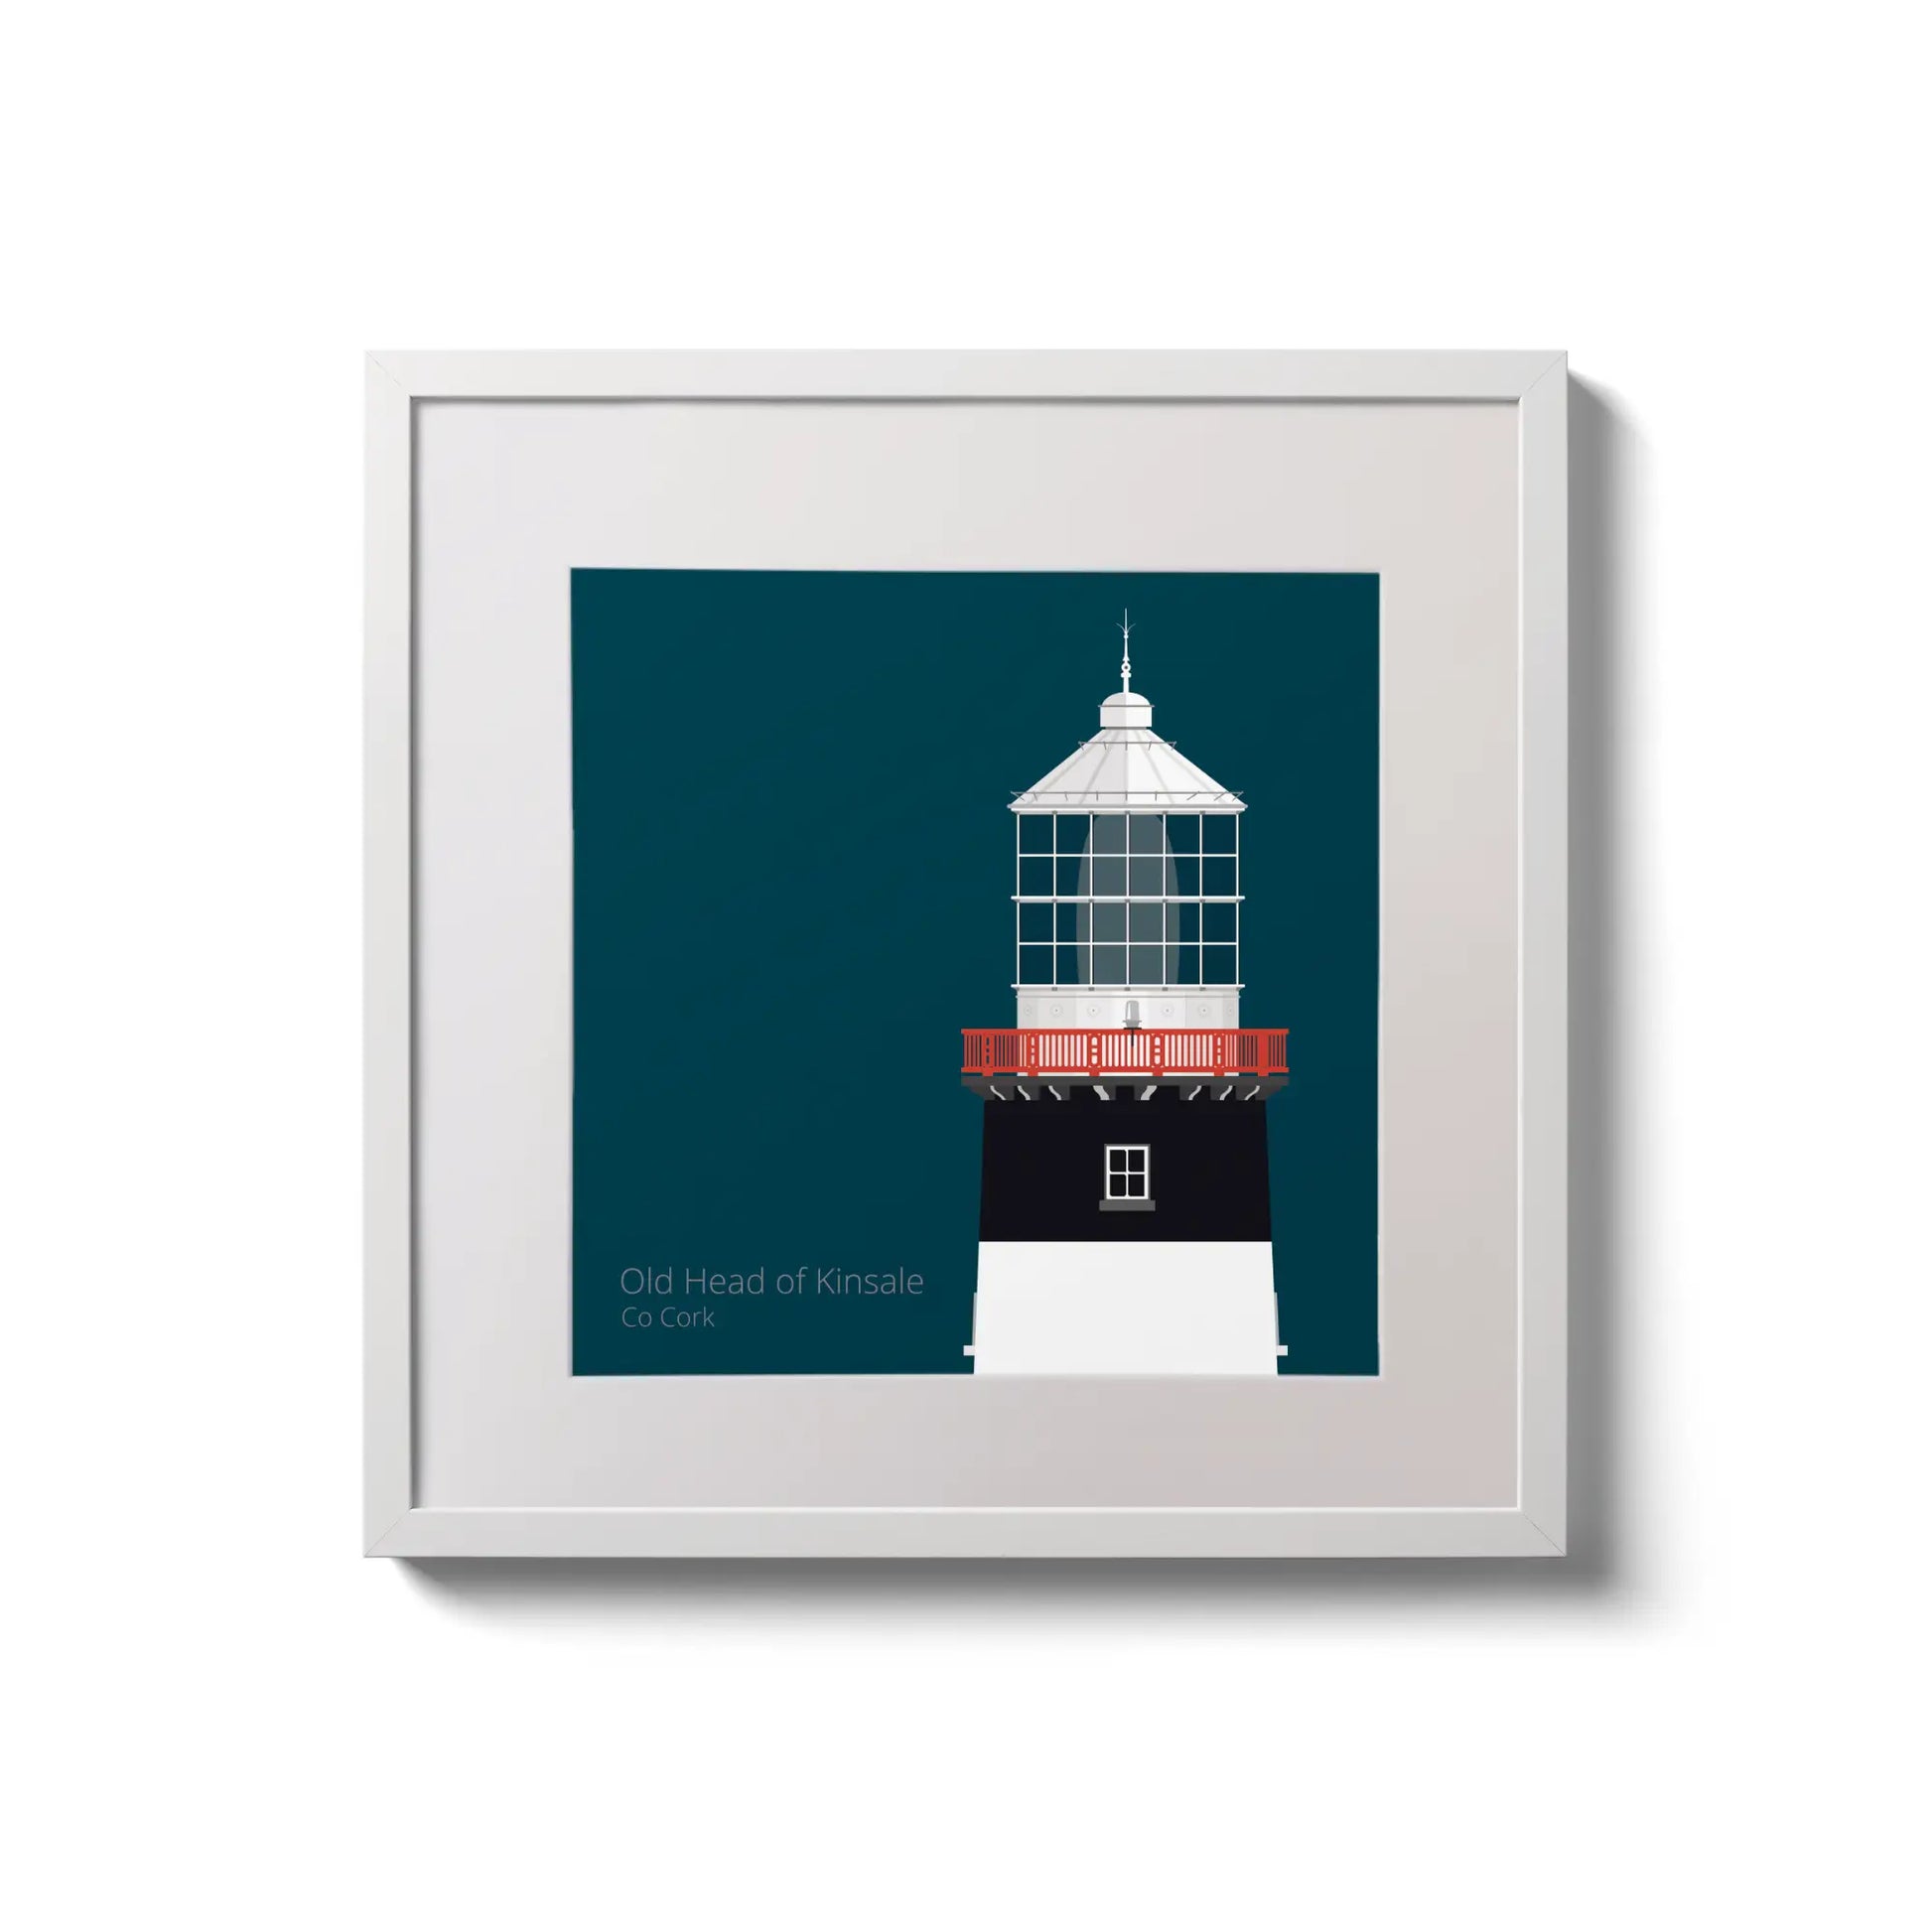 Illustration of Old Head of Kinsale lighthouse on a midnight blue background,  in a white square frame measuring 20x20cm.